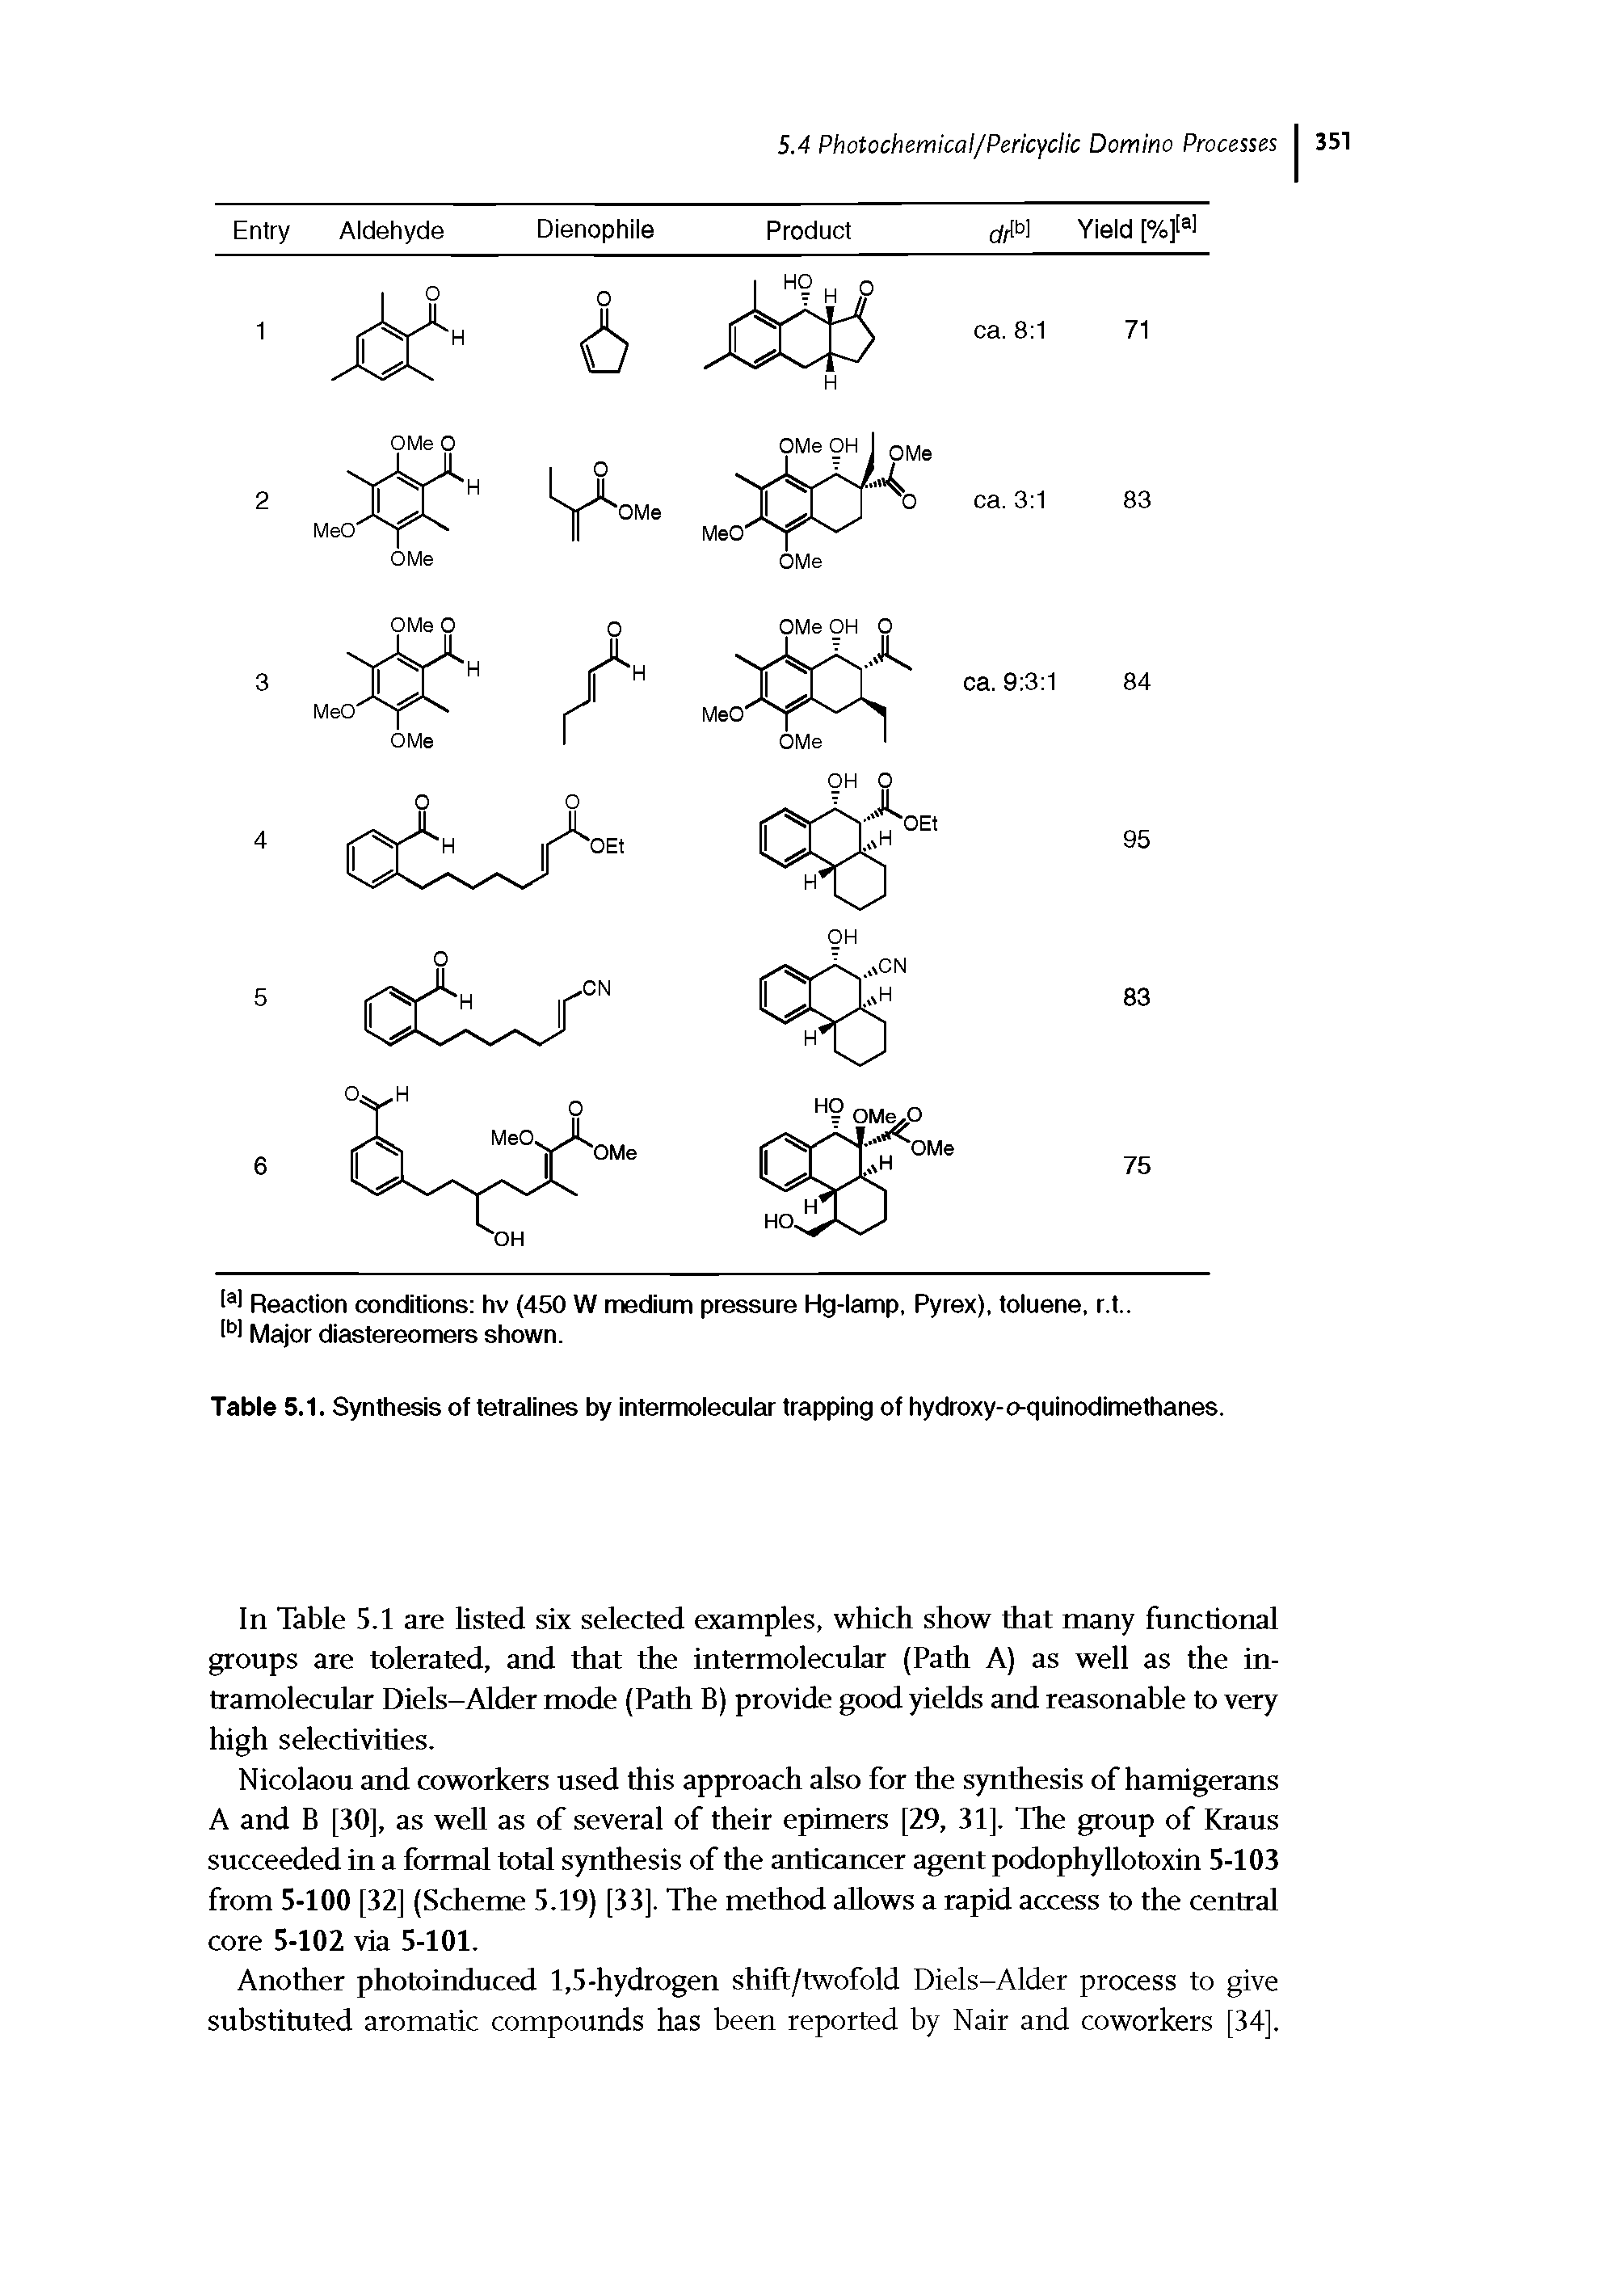 Table 5.1. Synthesis of tetralines by intermolecular trapping of hydroxy-o-quinodimethanes.